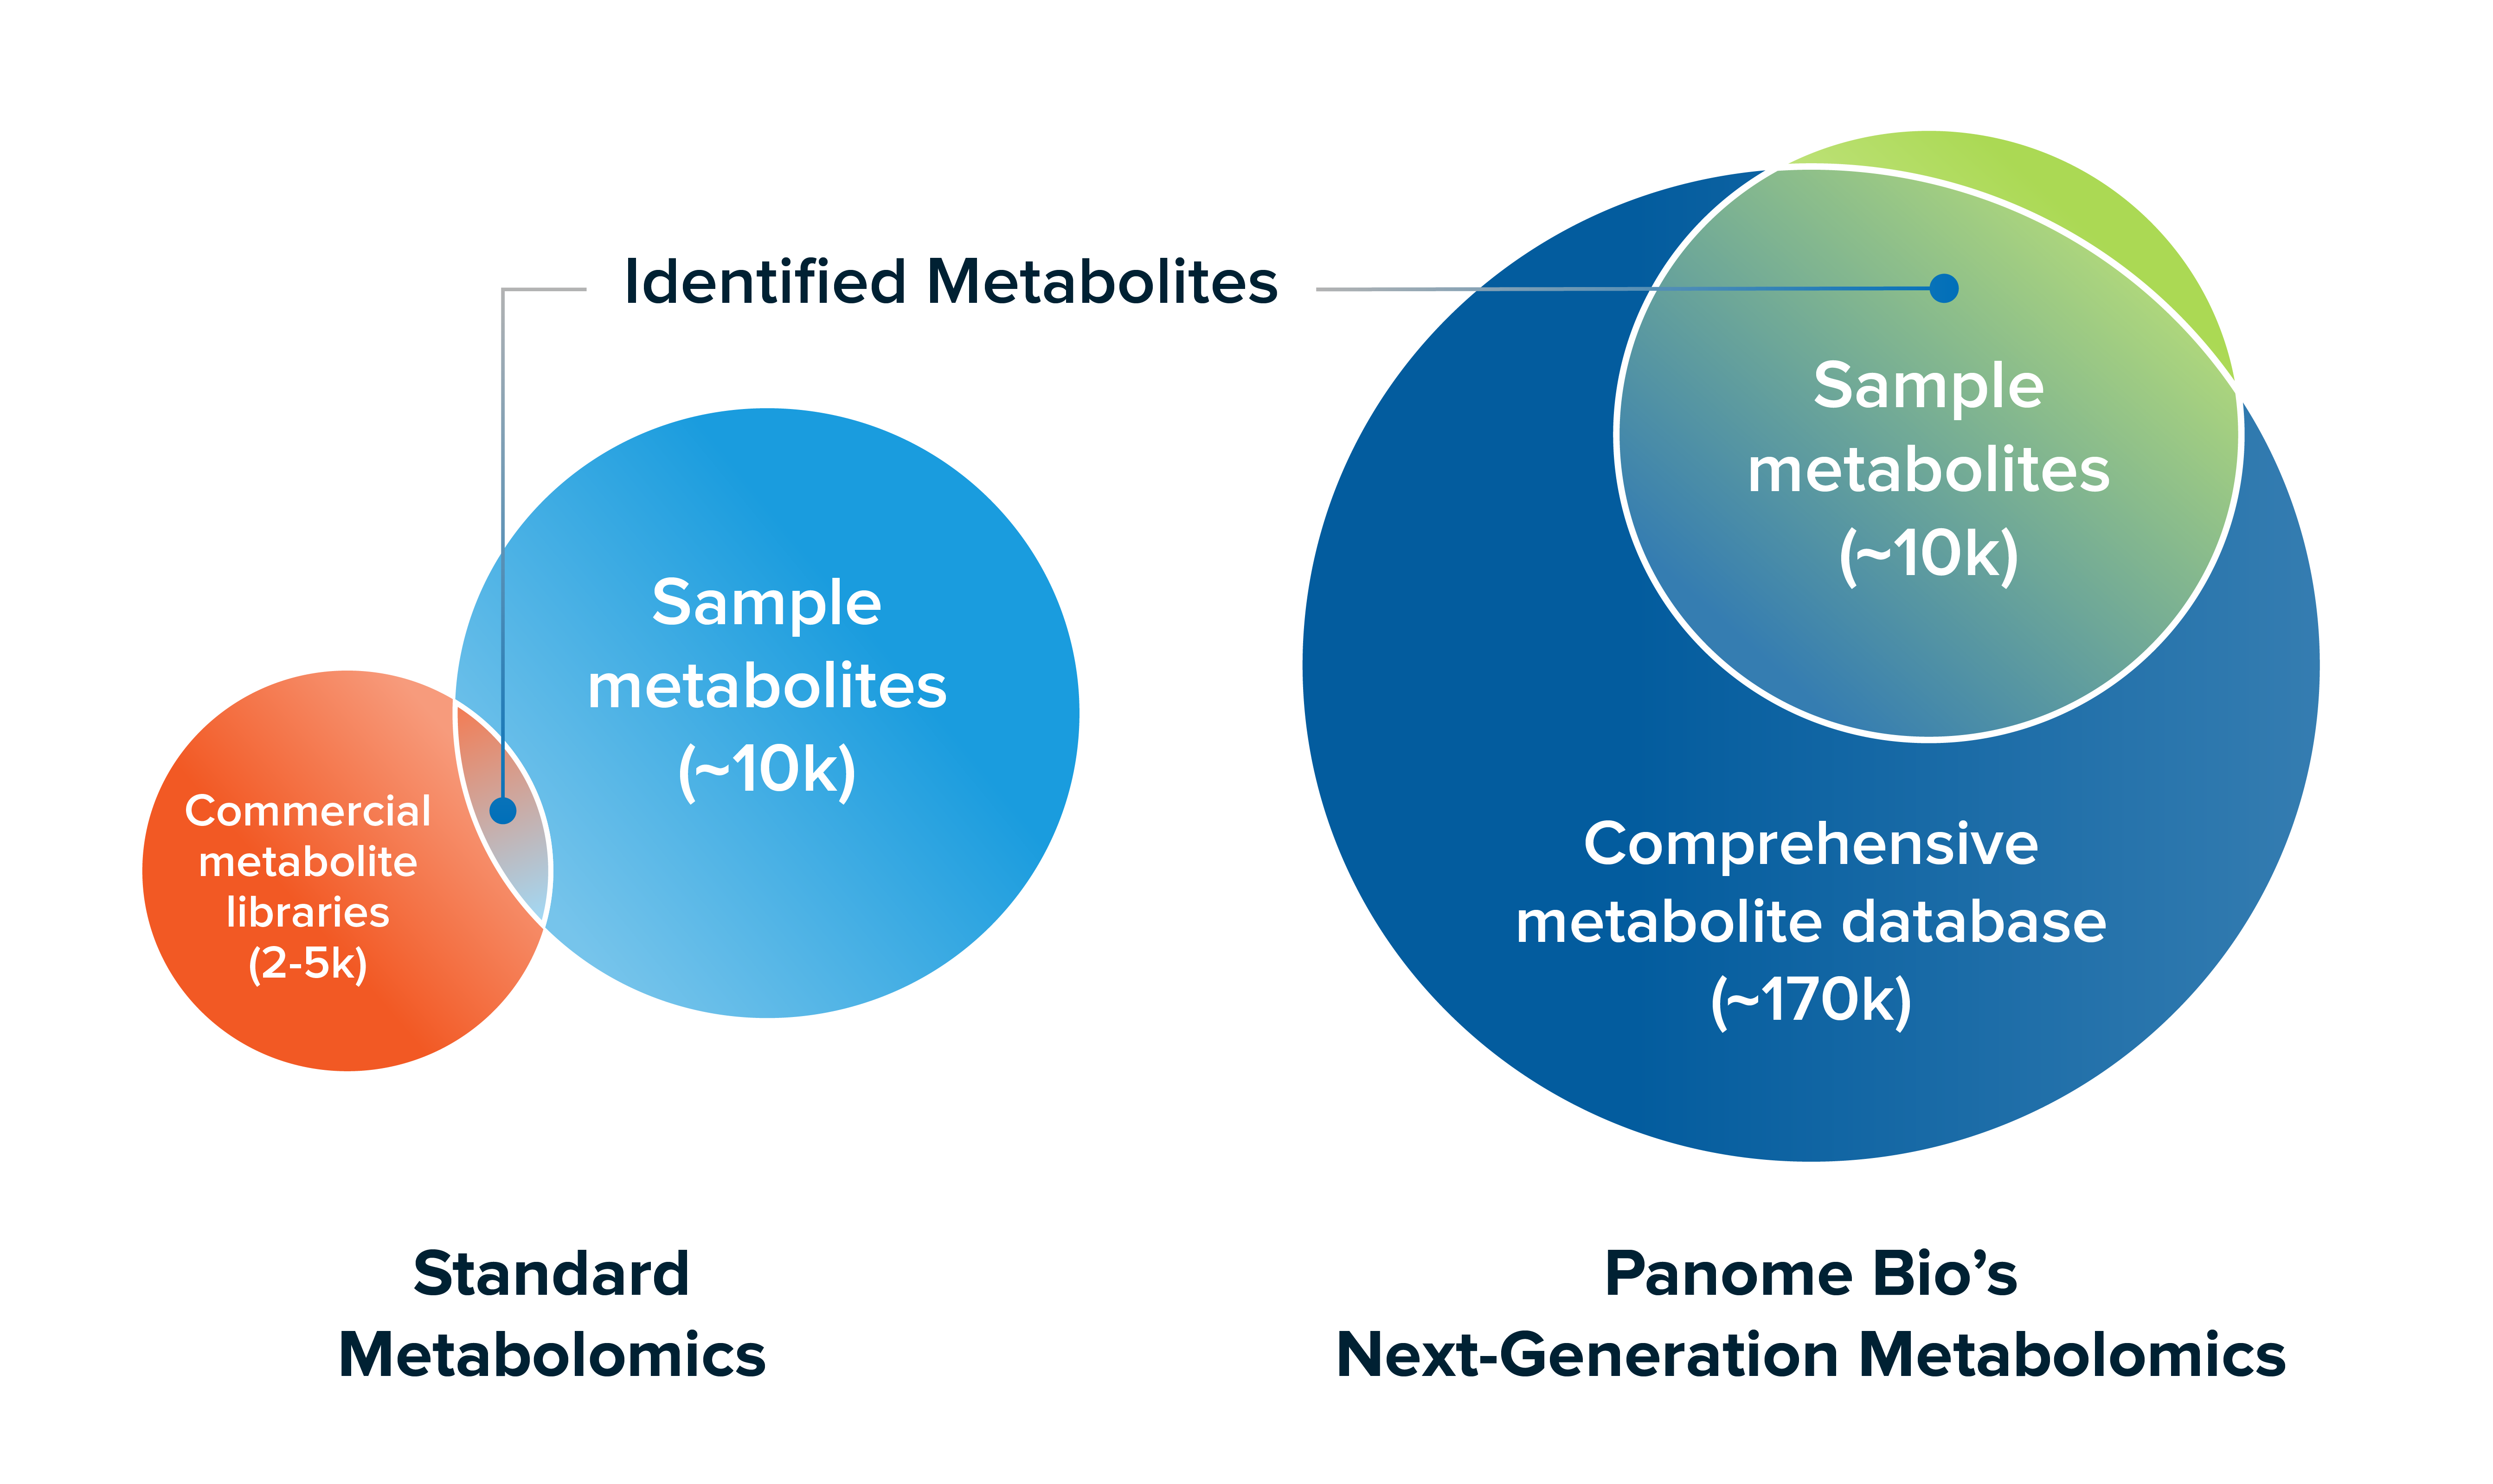 Comparison between standard metabolomics and Next-Generation Metabolomics from Panome Bio, with Panome Bio identifying thousands more than standard.